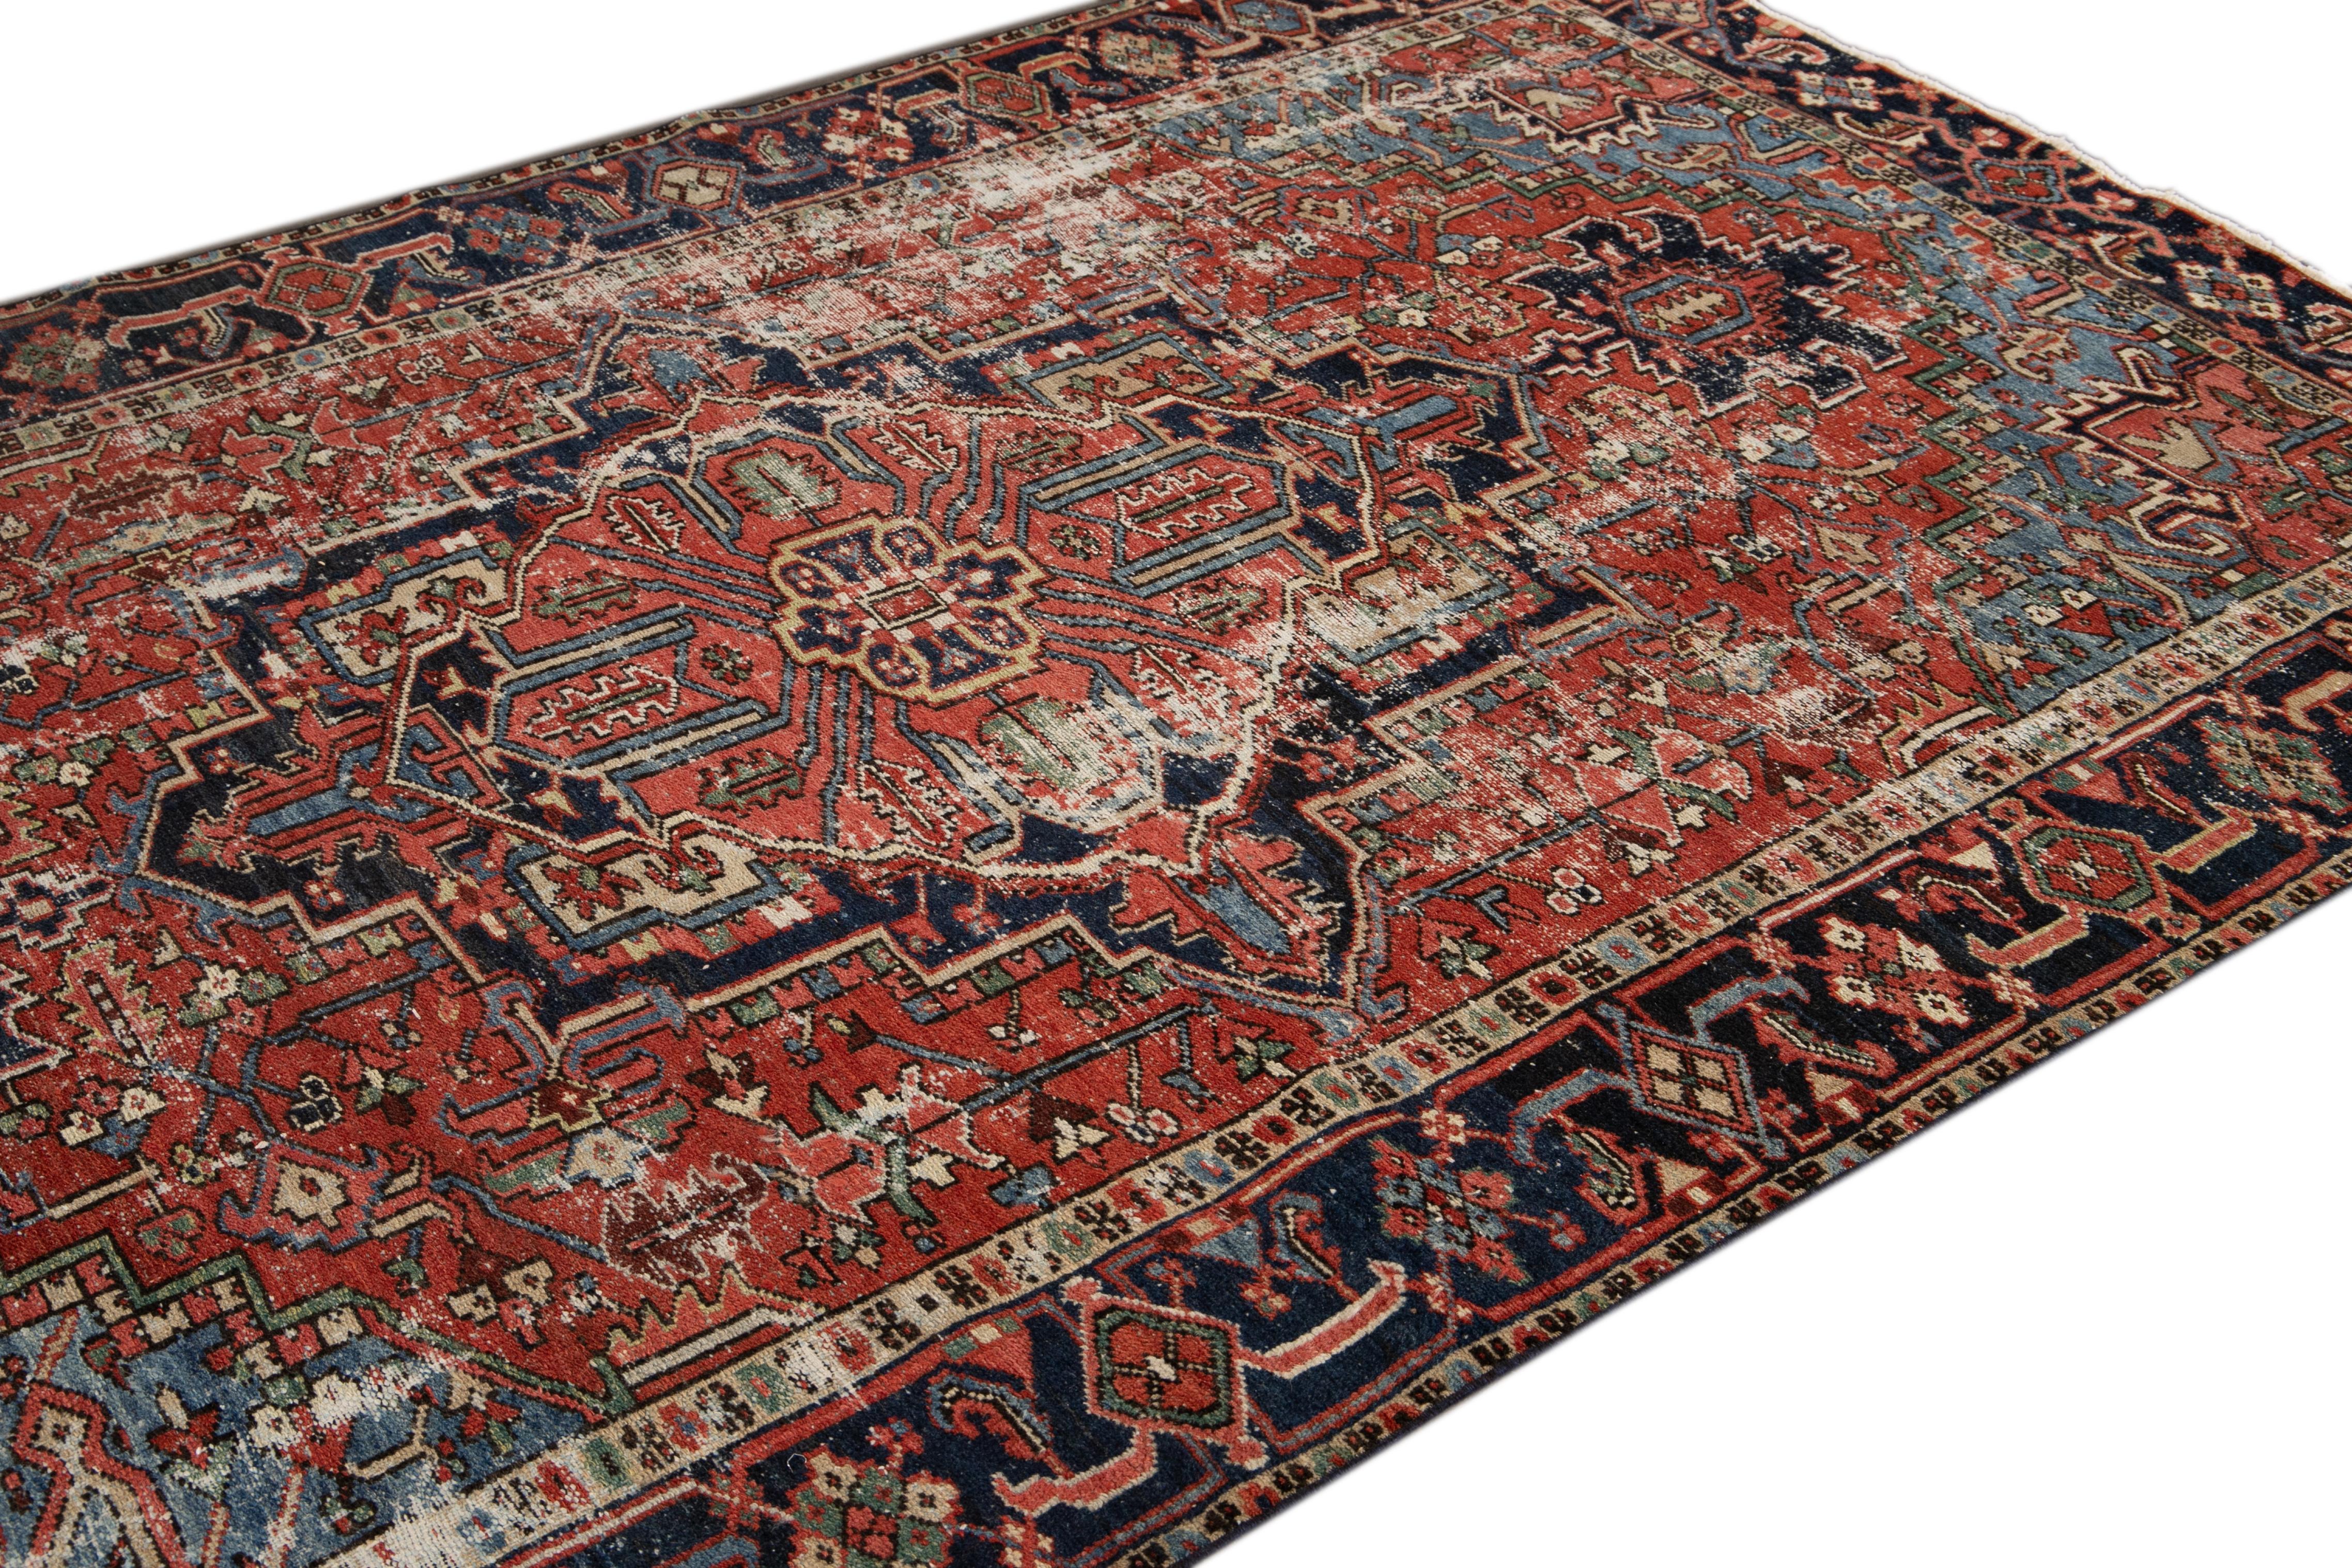  Red Antique Persian Heriz Handmade Wool Rug with Medallion Design In Distressed Condition For Sale In Norwalk, CT